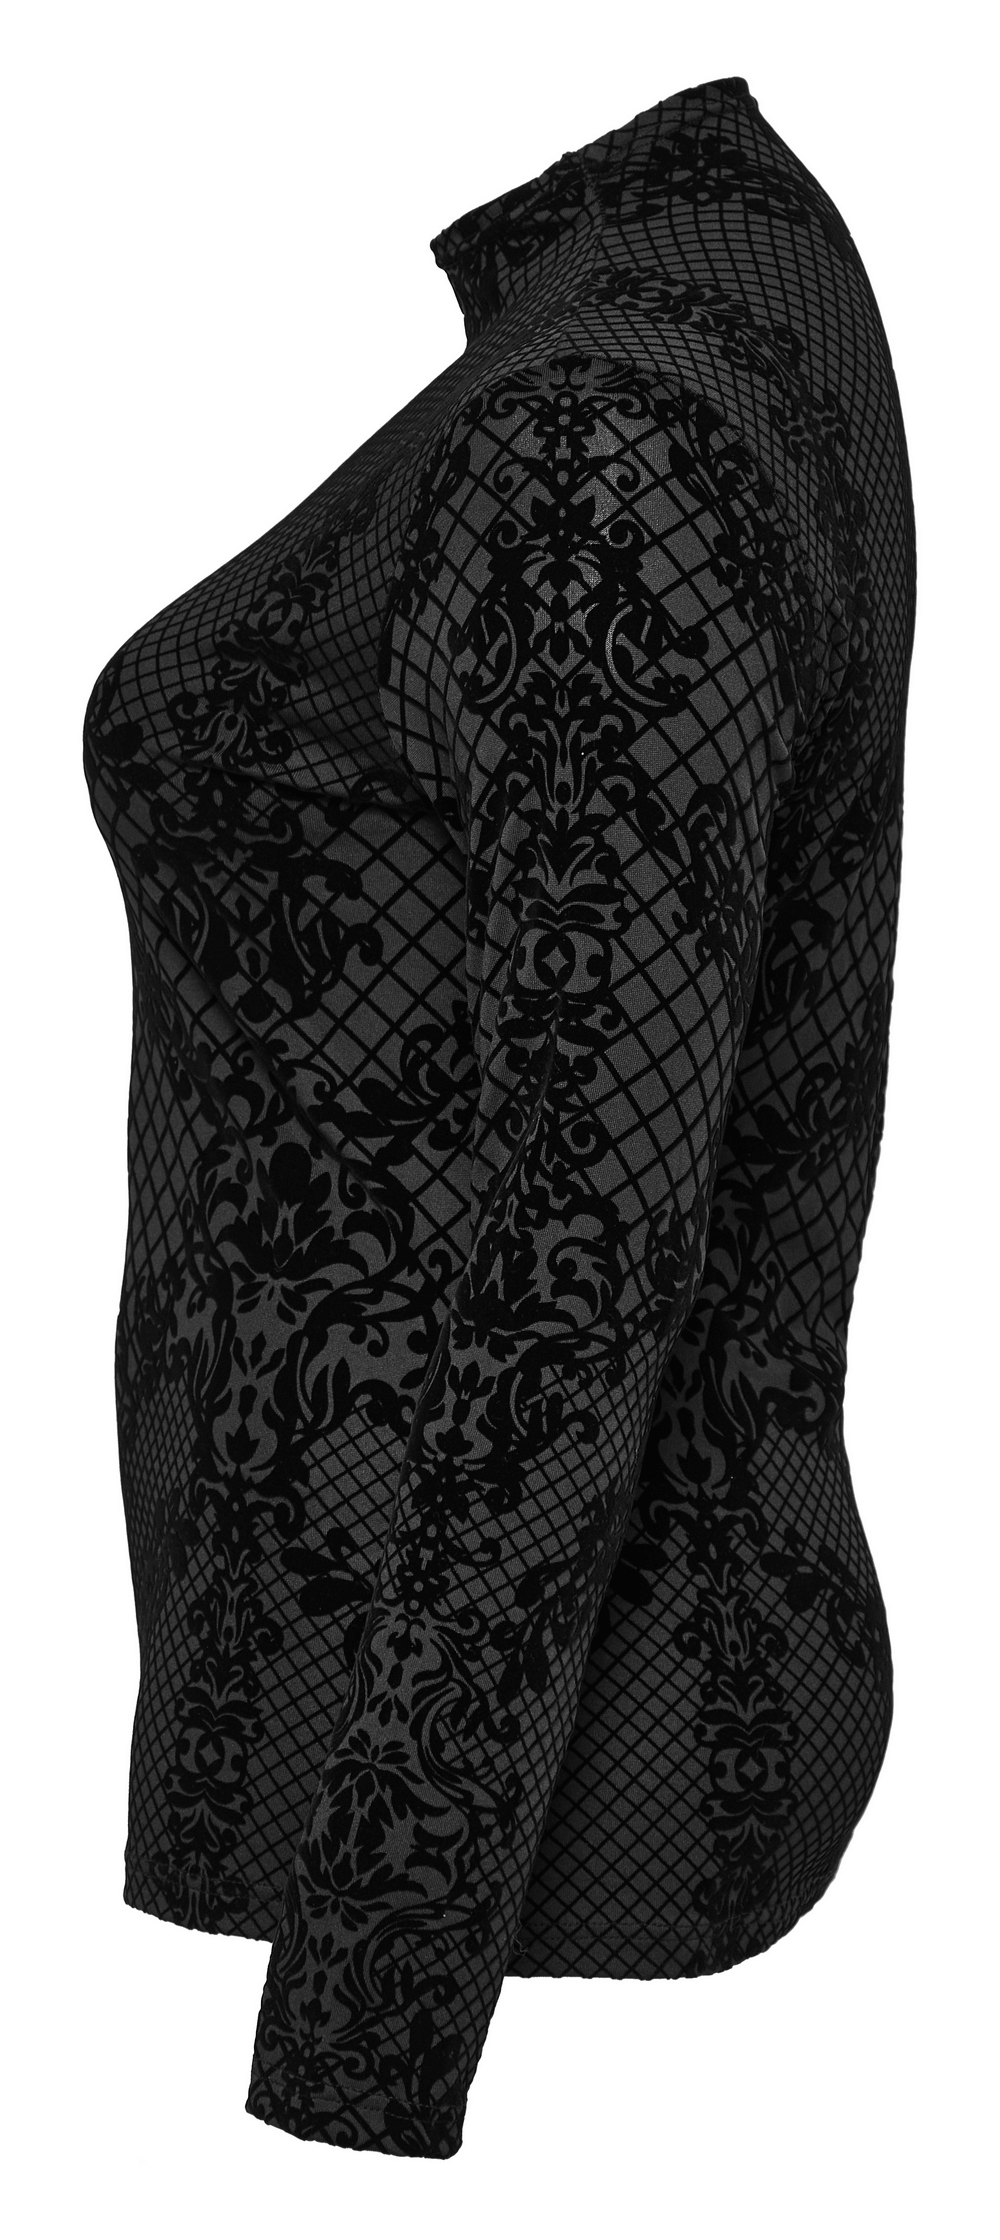 Elastic Knit Goth Flocking Top with High Collar